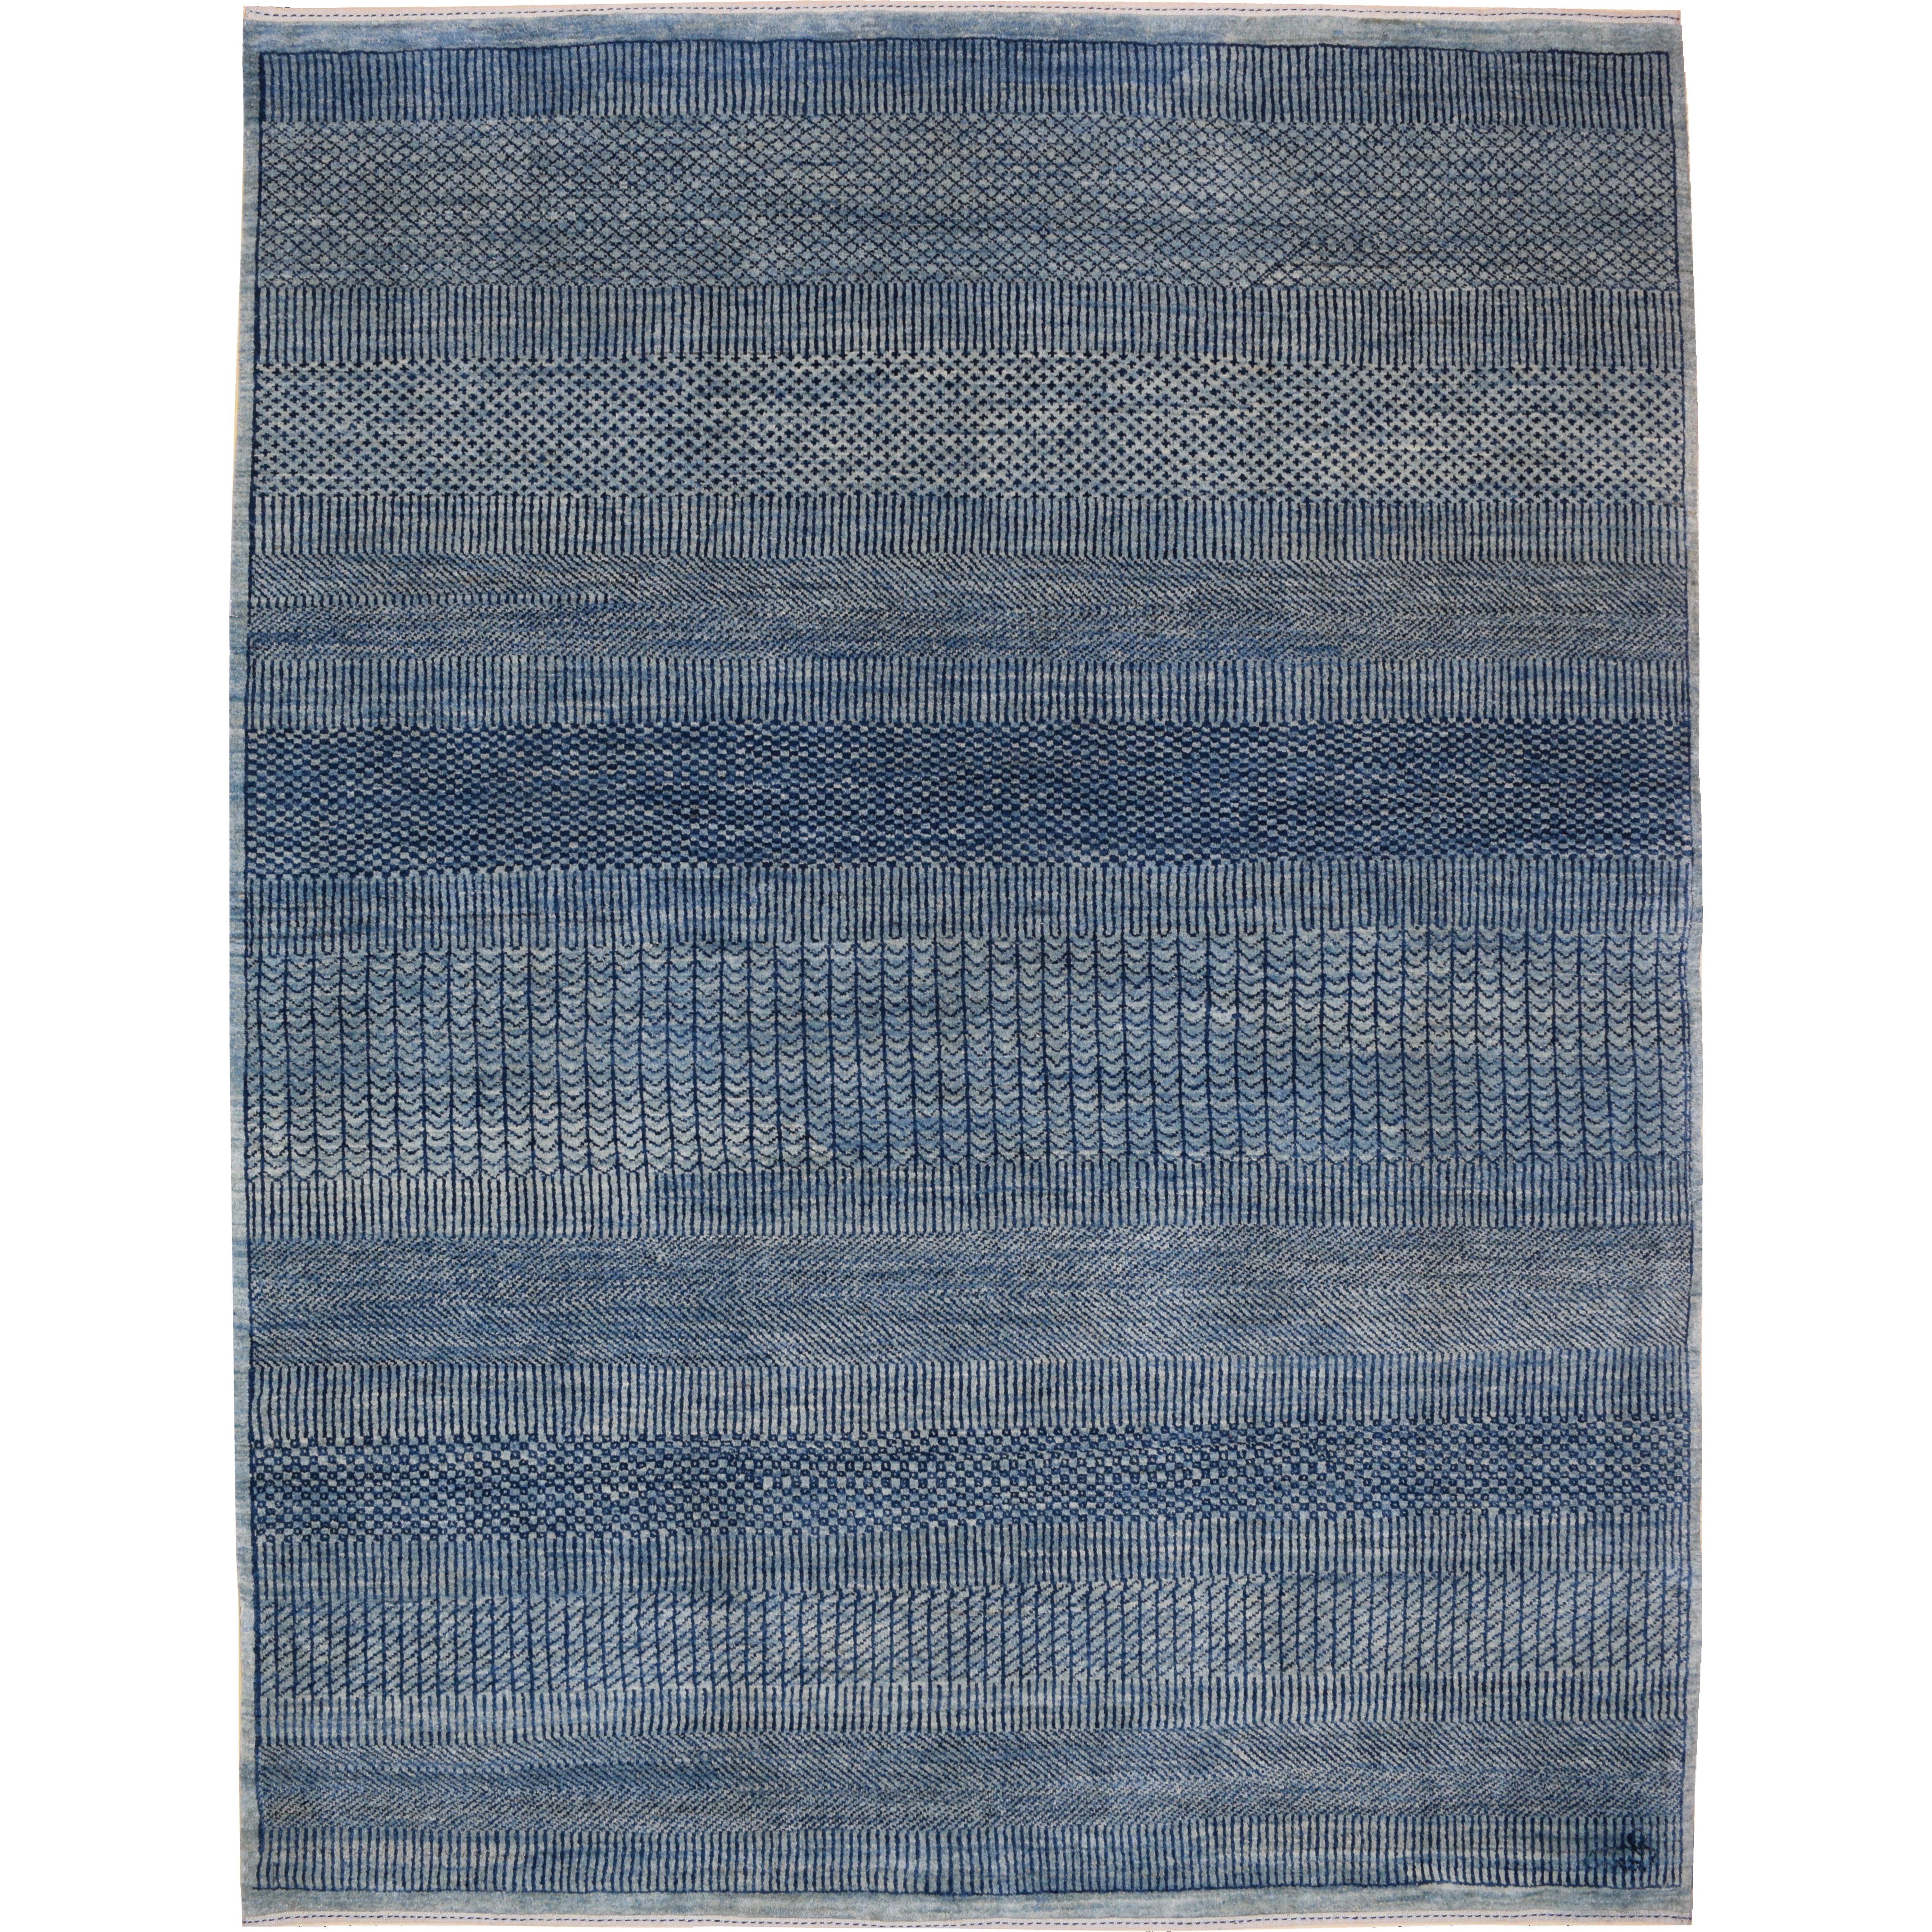 Contemporary Persian Rug, Indigo, Hand-knotted Wool, Orley Shabahang, 5' x 7' For Sale